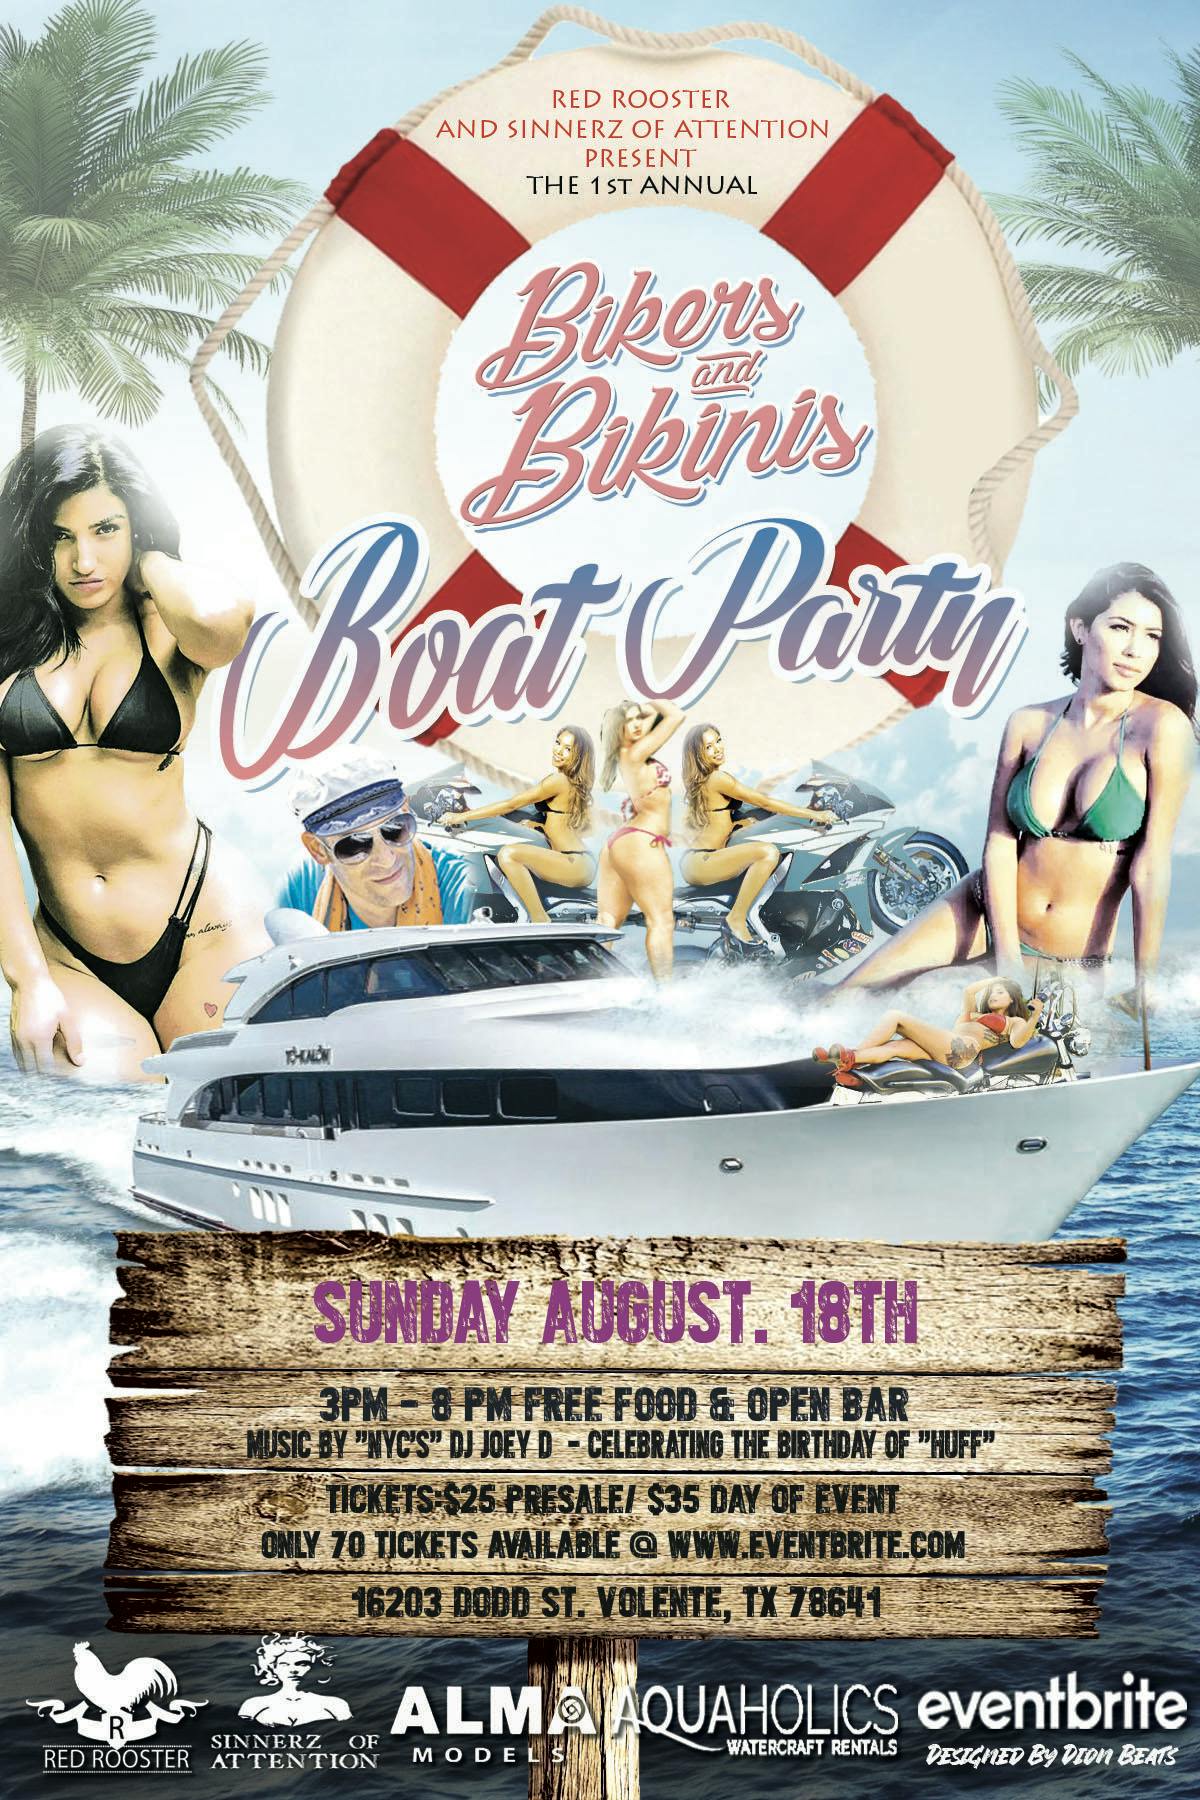 SINNERZ OF ATTENTION AND RED ROOSTER PRESENT BIKERS AND BIKINIS BOAT PARTY